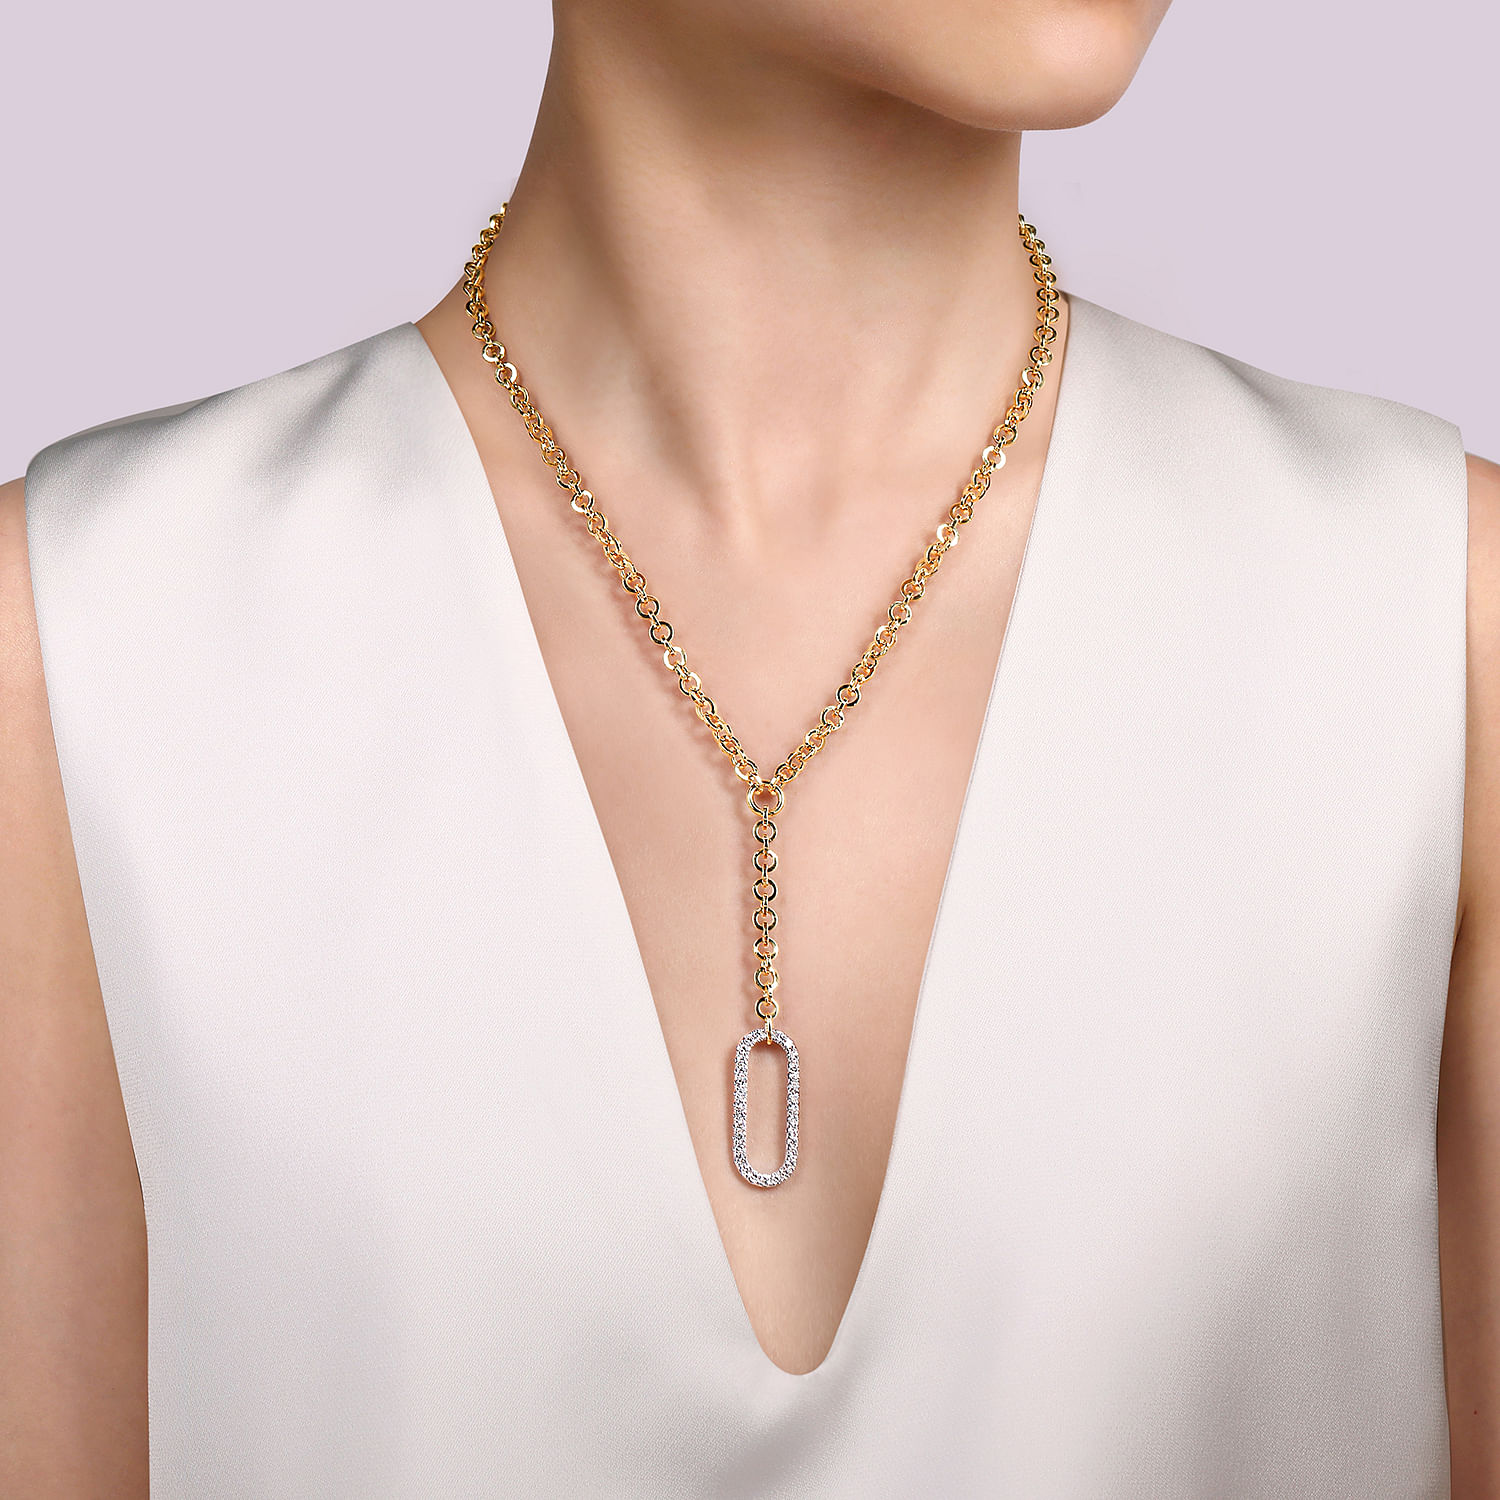 14K Yellow Gold Hollow Tube Link Diamond Necklace